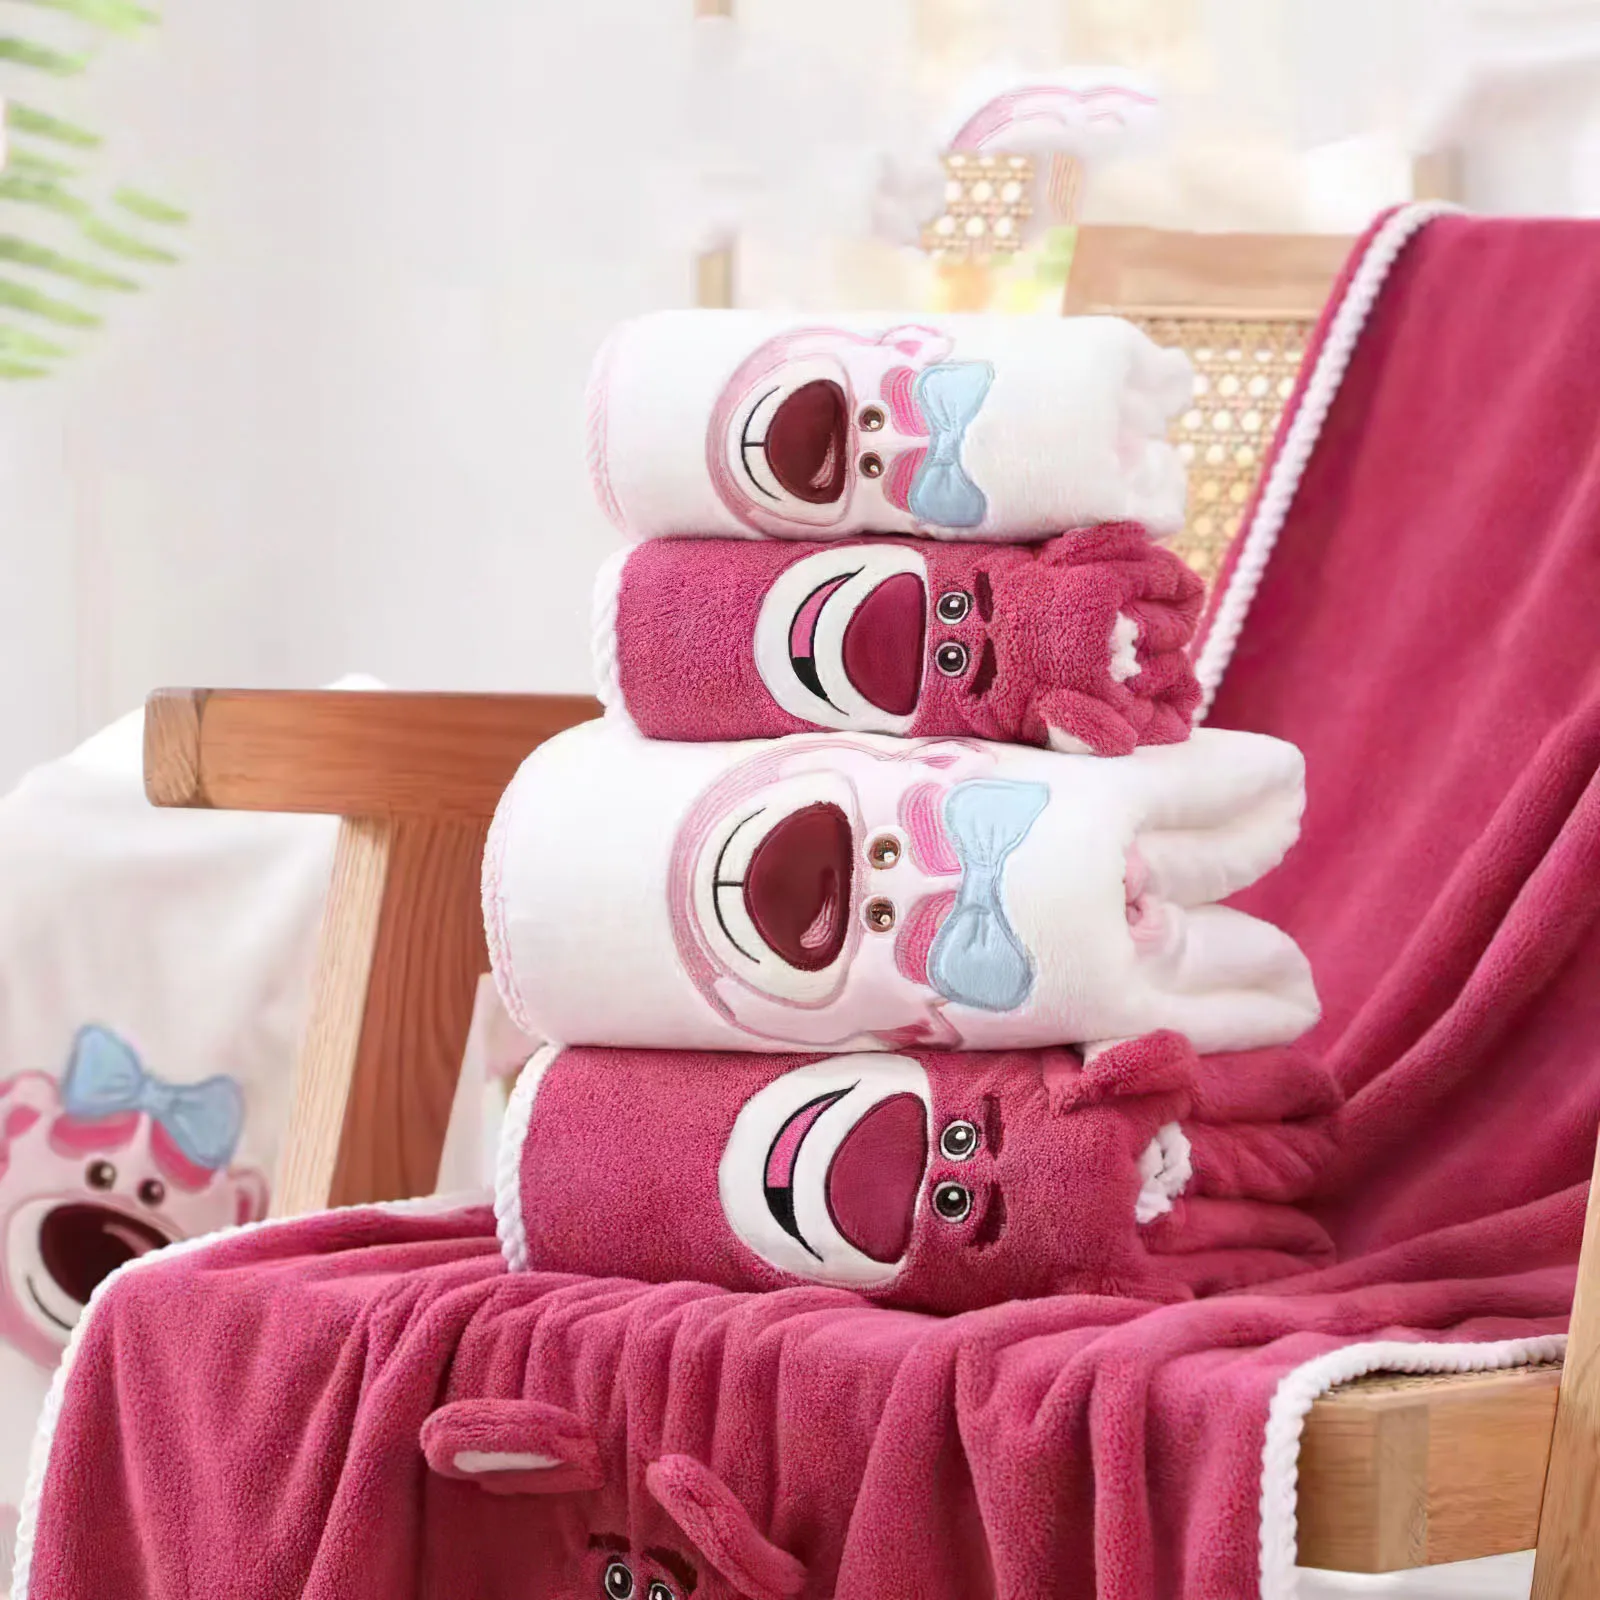 

Strawberry Color Face Bath Towel Set Two-piece Cartoon Bear Embroidery Beach Towel Nap Cover Blanket Absorbent Soft Thickening